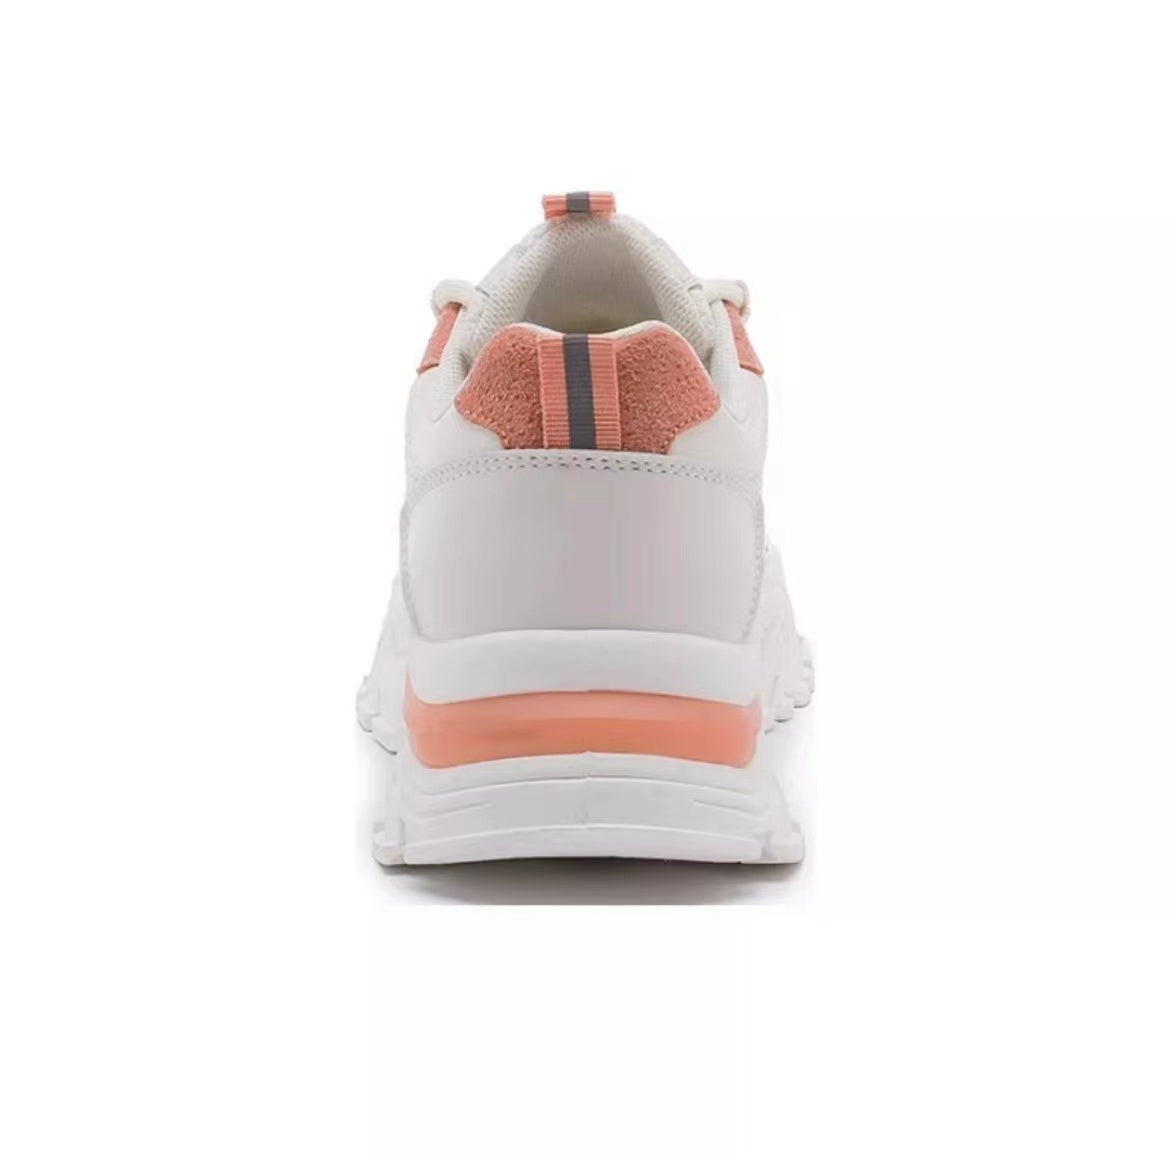 Warrior Thick Sole Height Increasing Dad Shoes - White/Orange